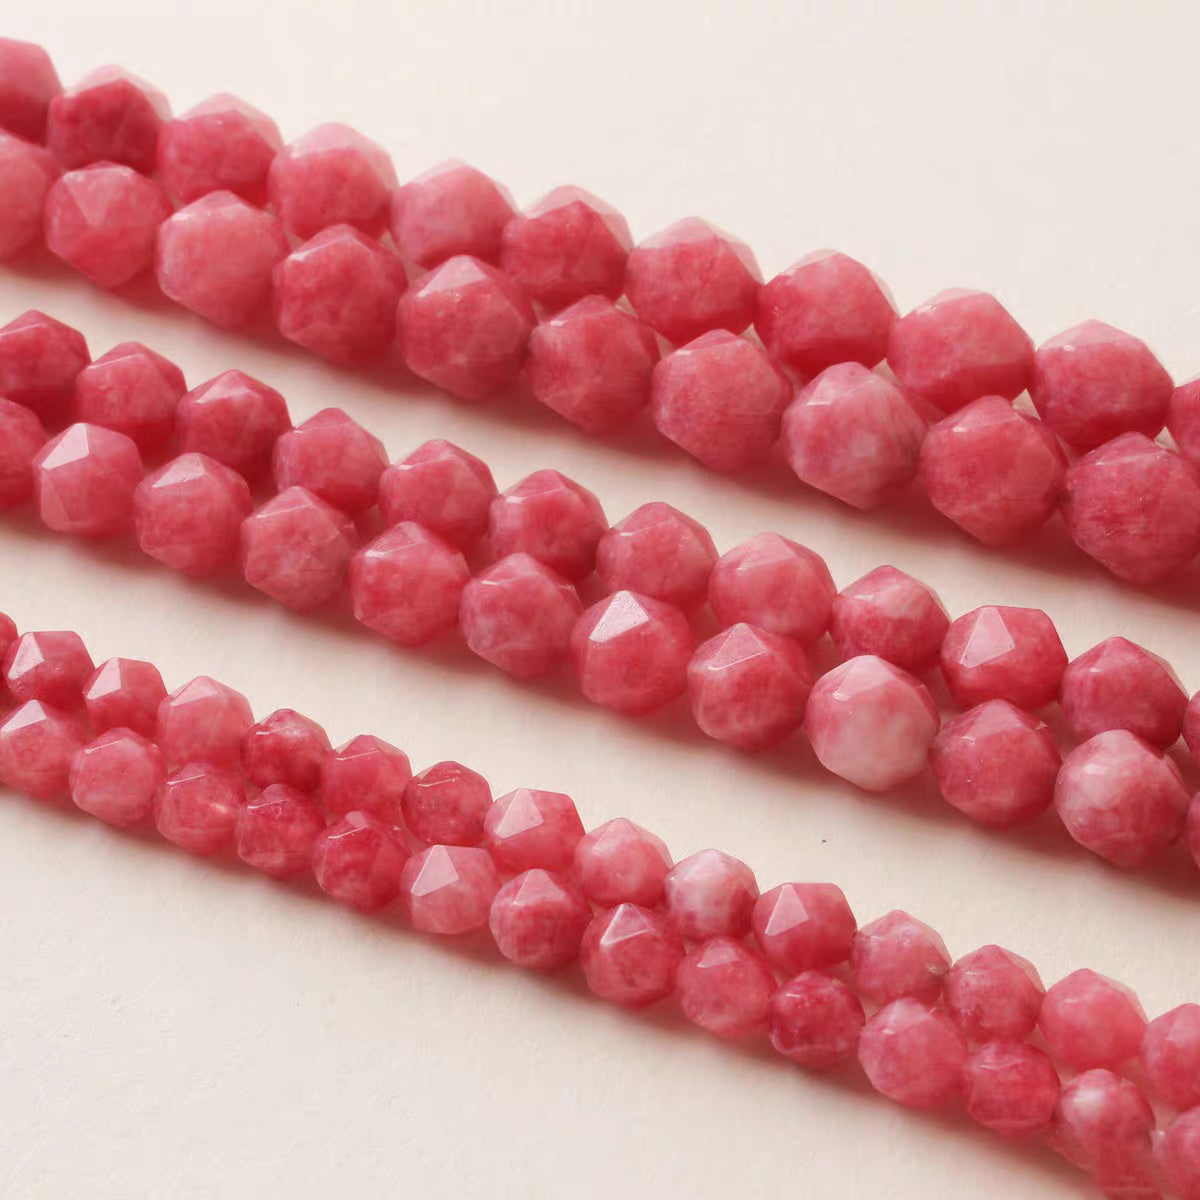 Red Pomegranate Beads